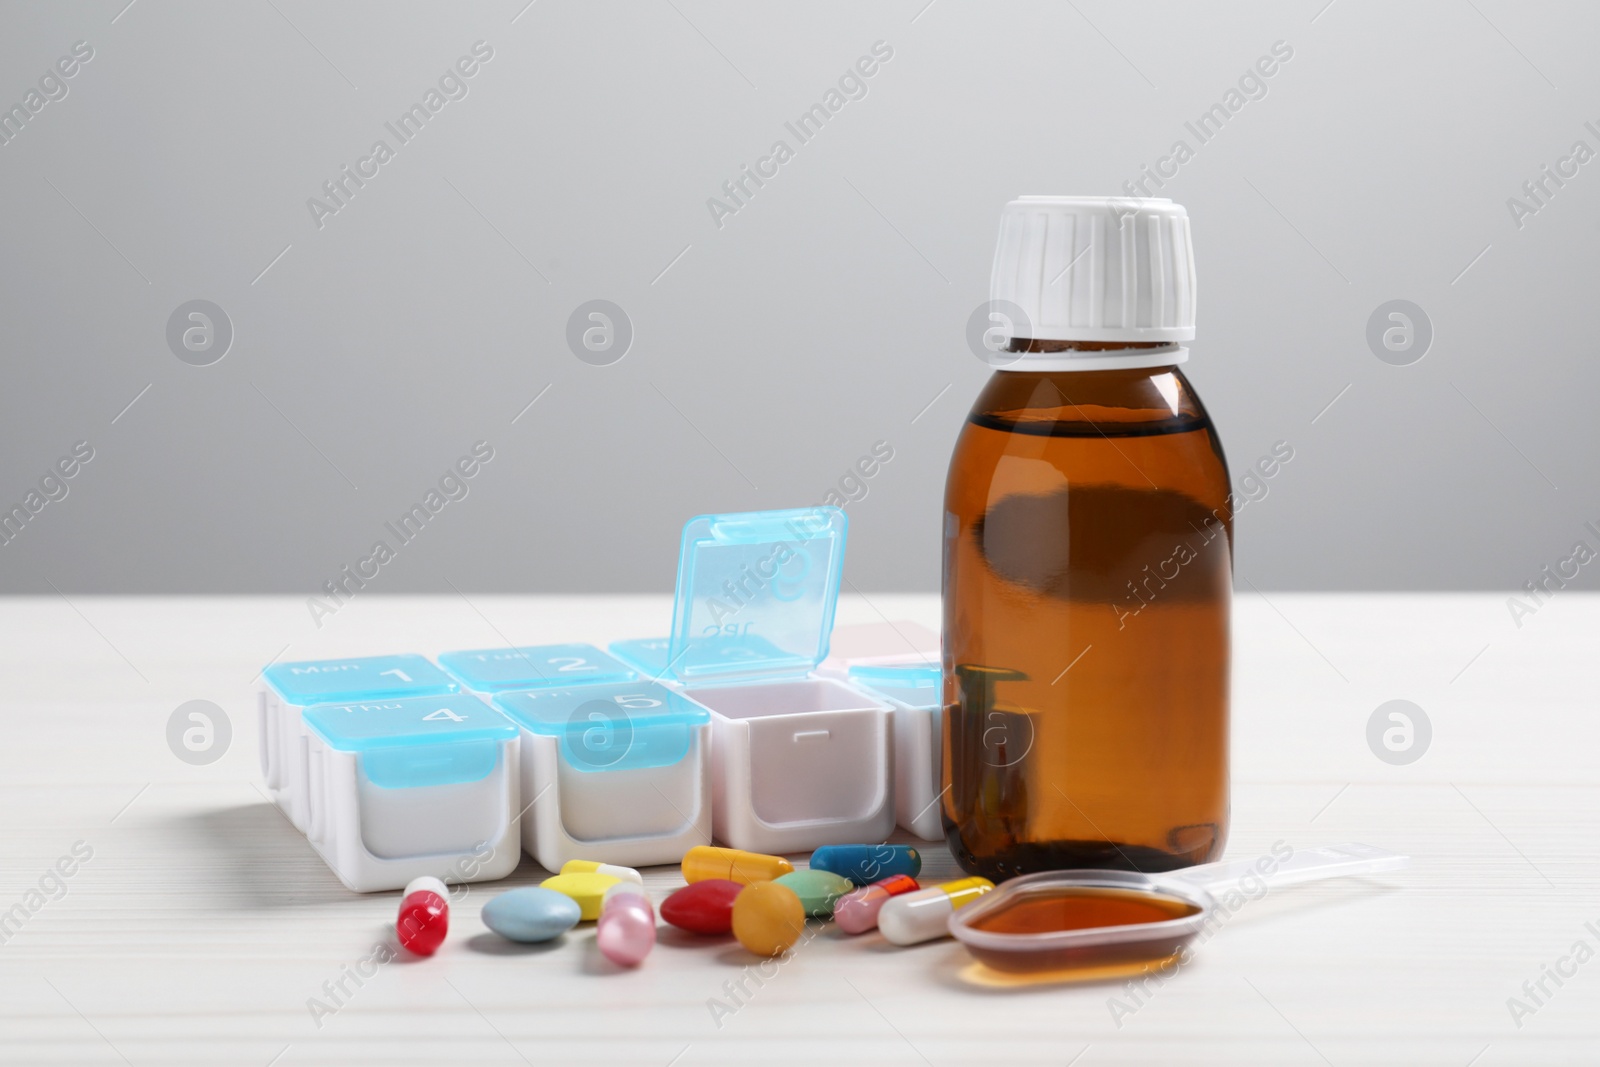 Photo of Bottle of syrup, dosing spoon and pills on white table against light grey background. Cold medicine